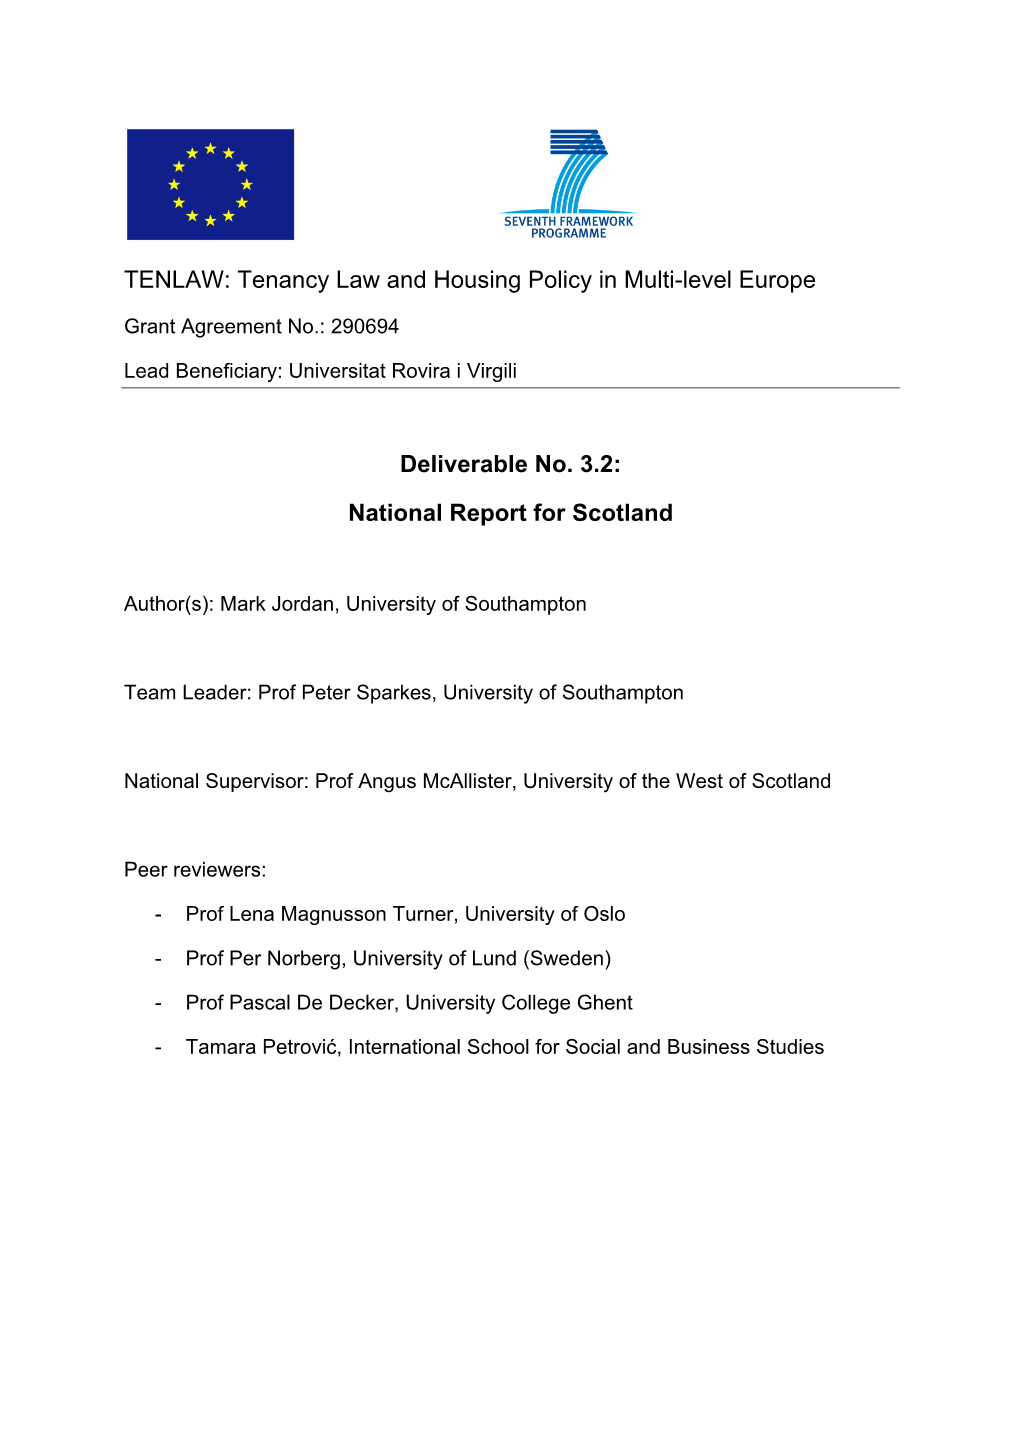 TENLAW: Tenancy Law and Housing Policy in Multi-Level Europe